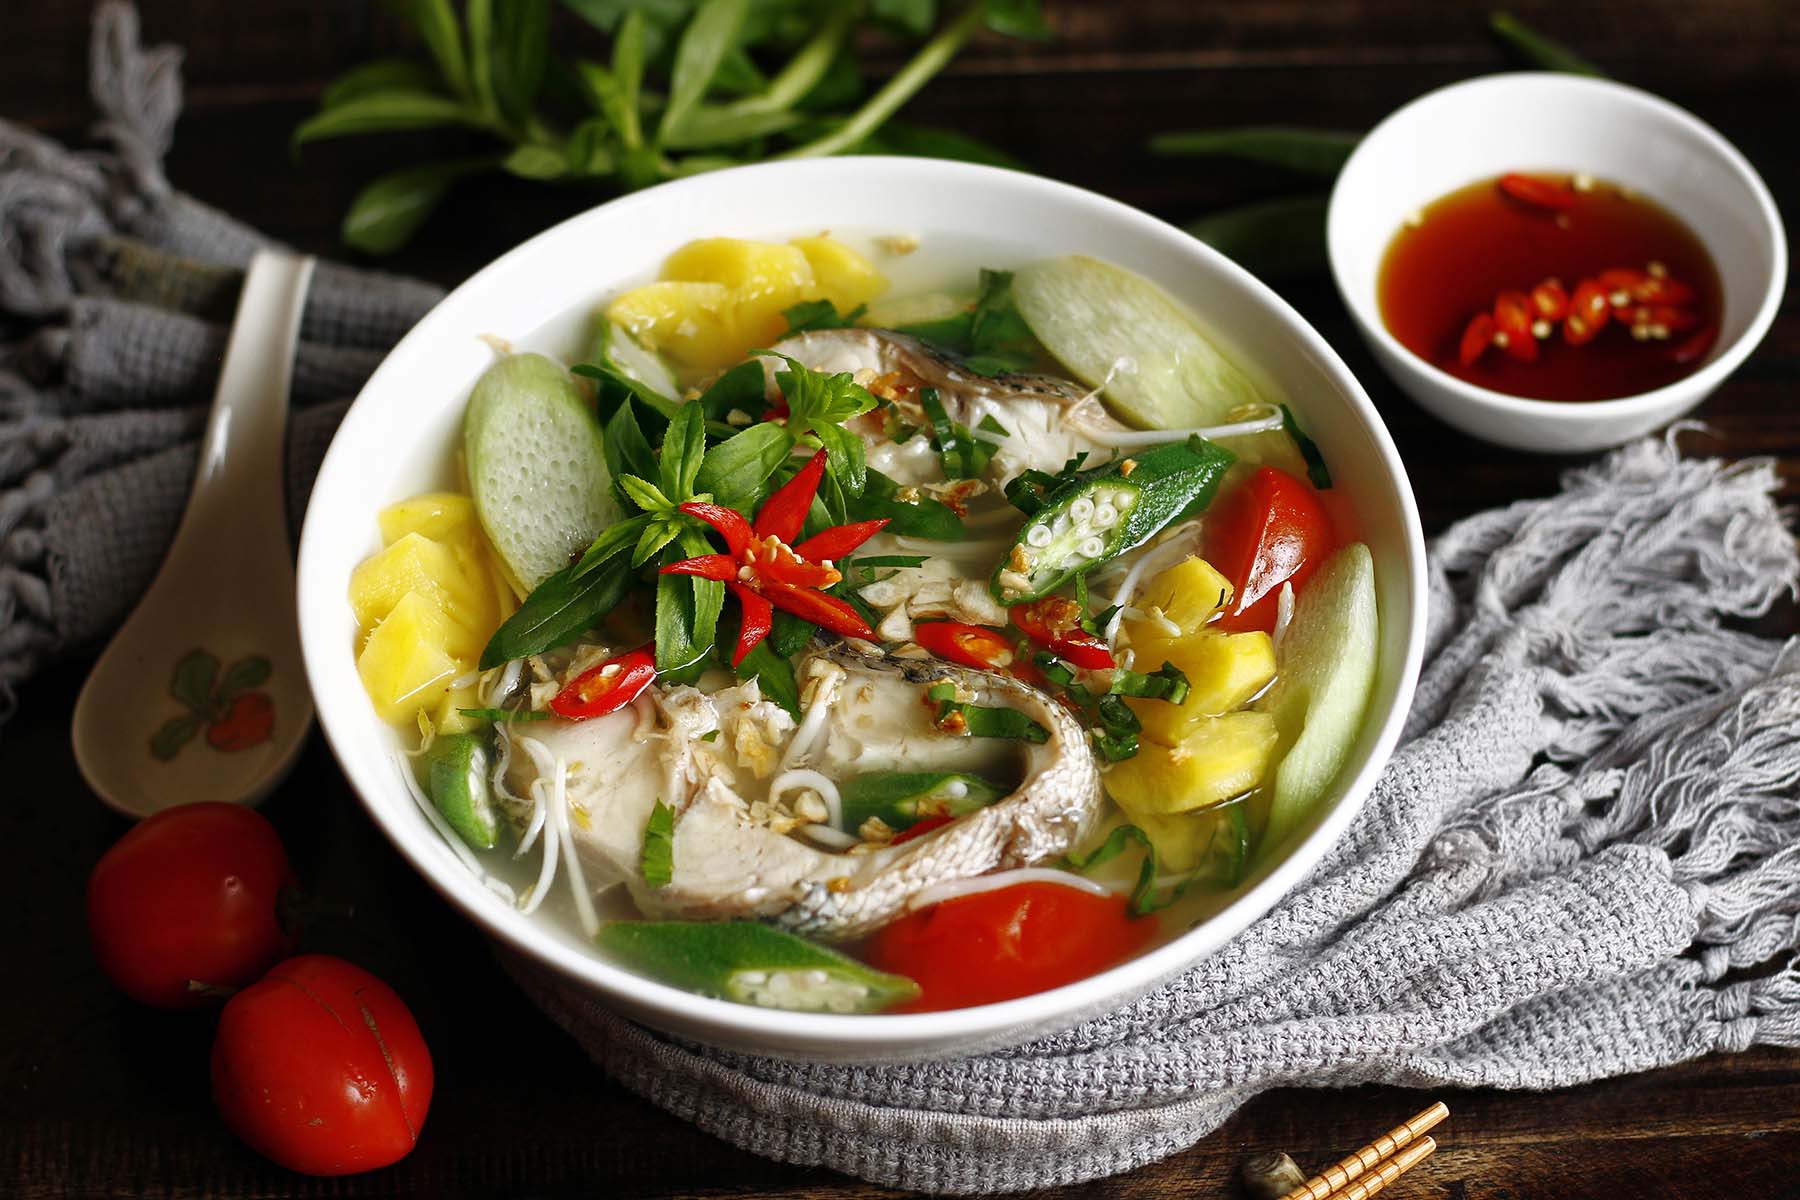 Two Vietnamese dishes among the top delicious fish dishes in Asia